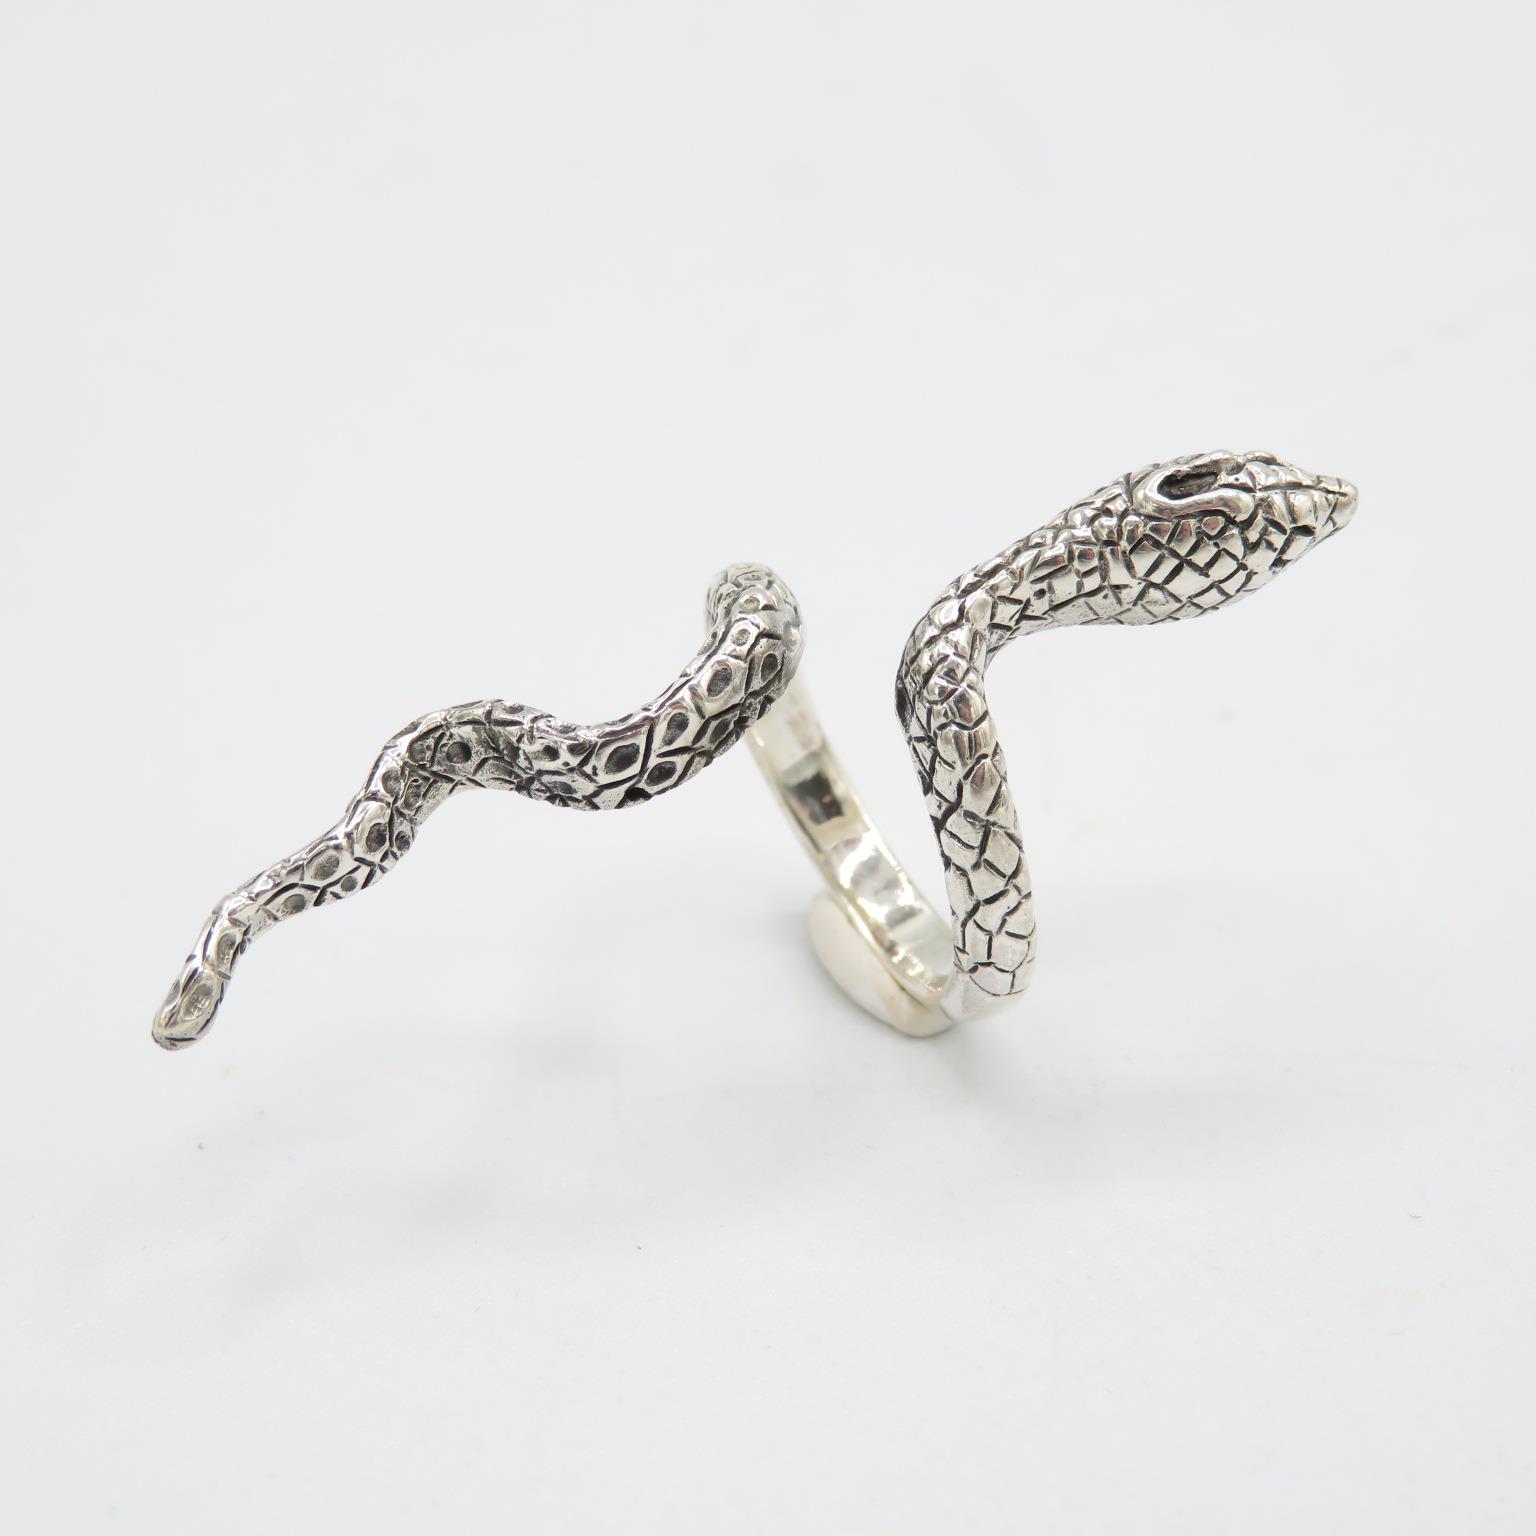 HM Sterling Silver 925 snake ring (7.6g) In excellent condition - Image 2 of 5